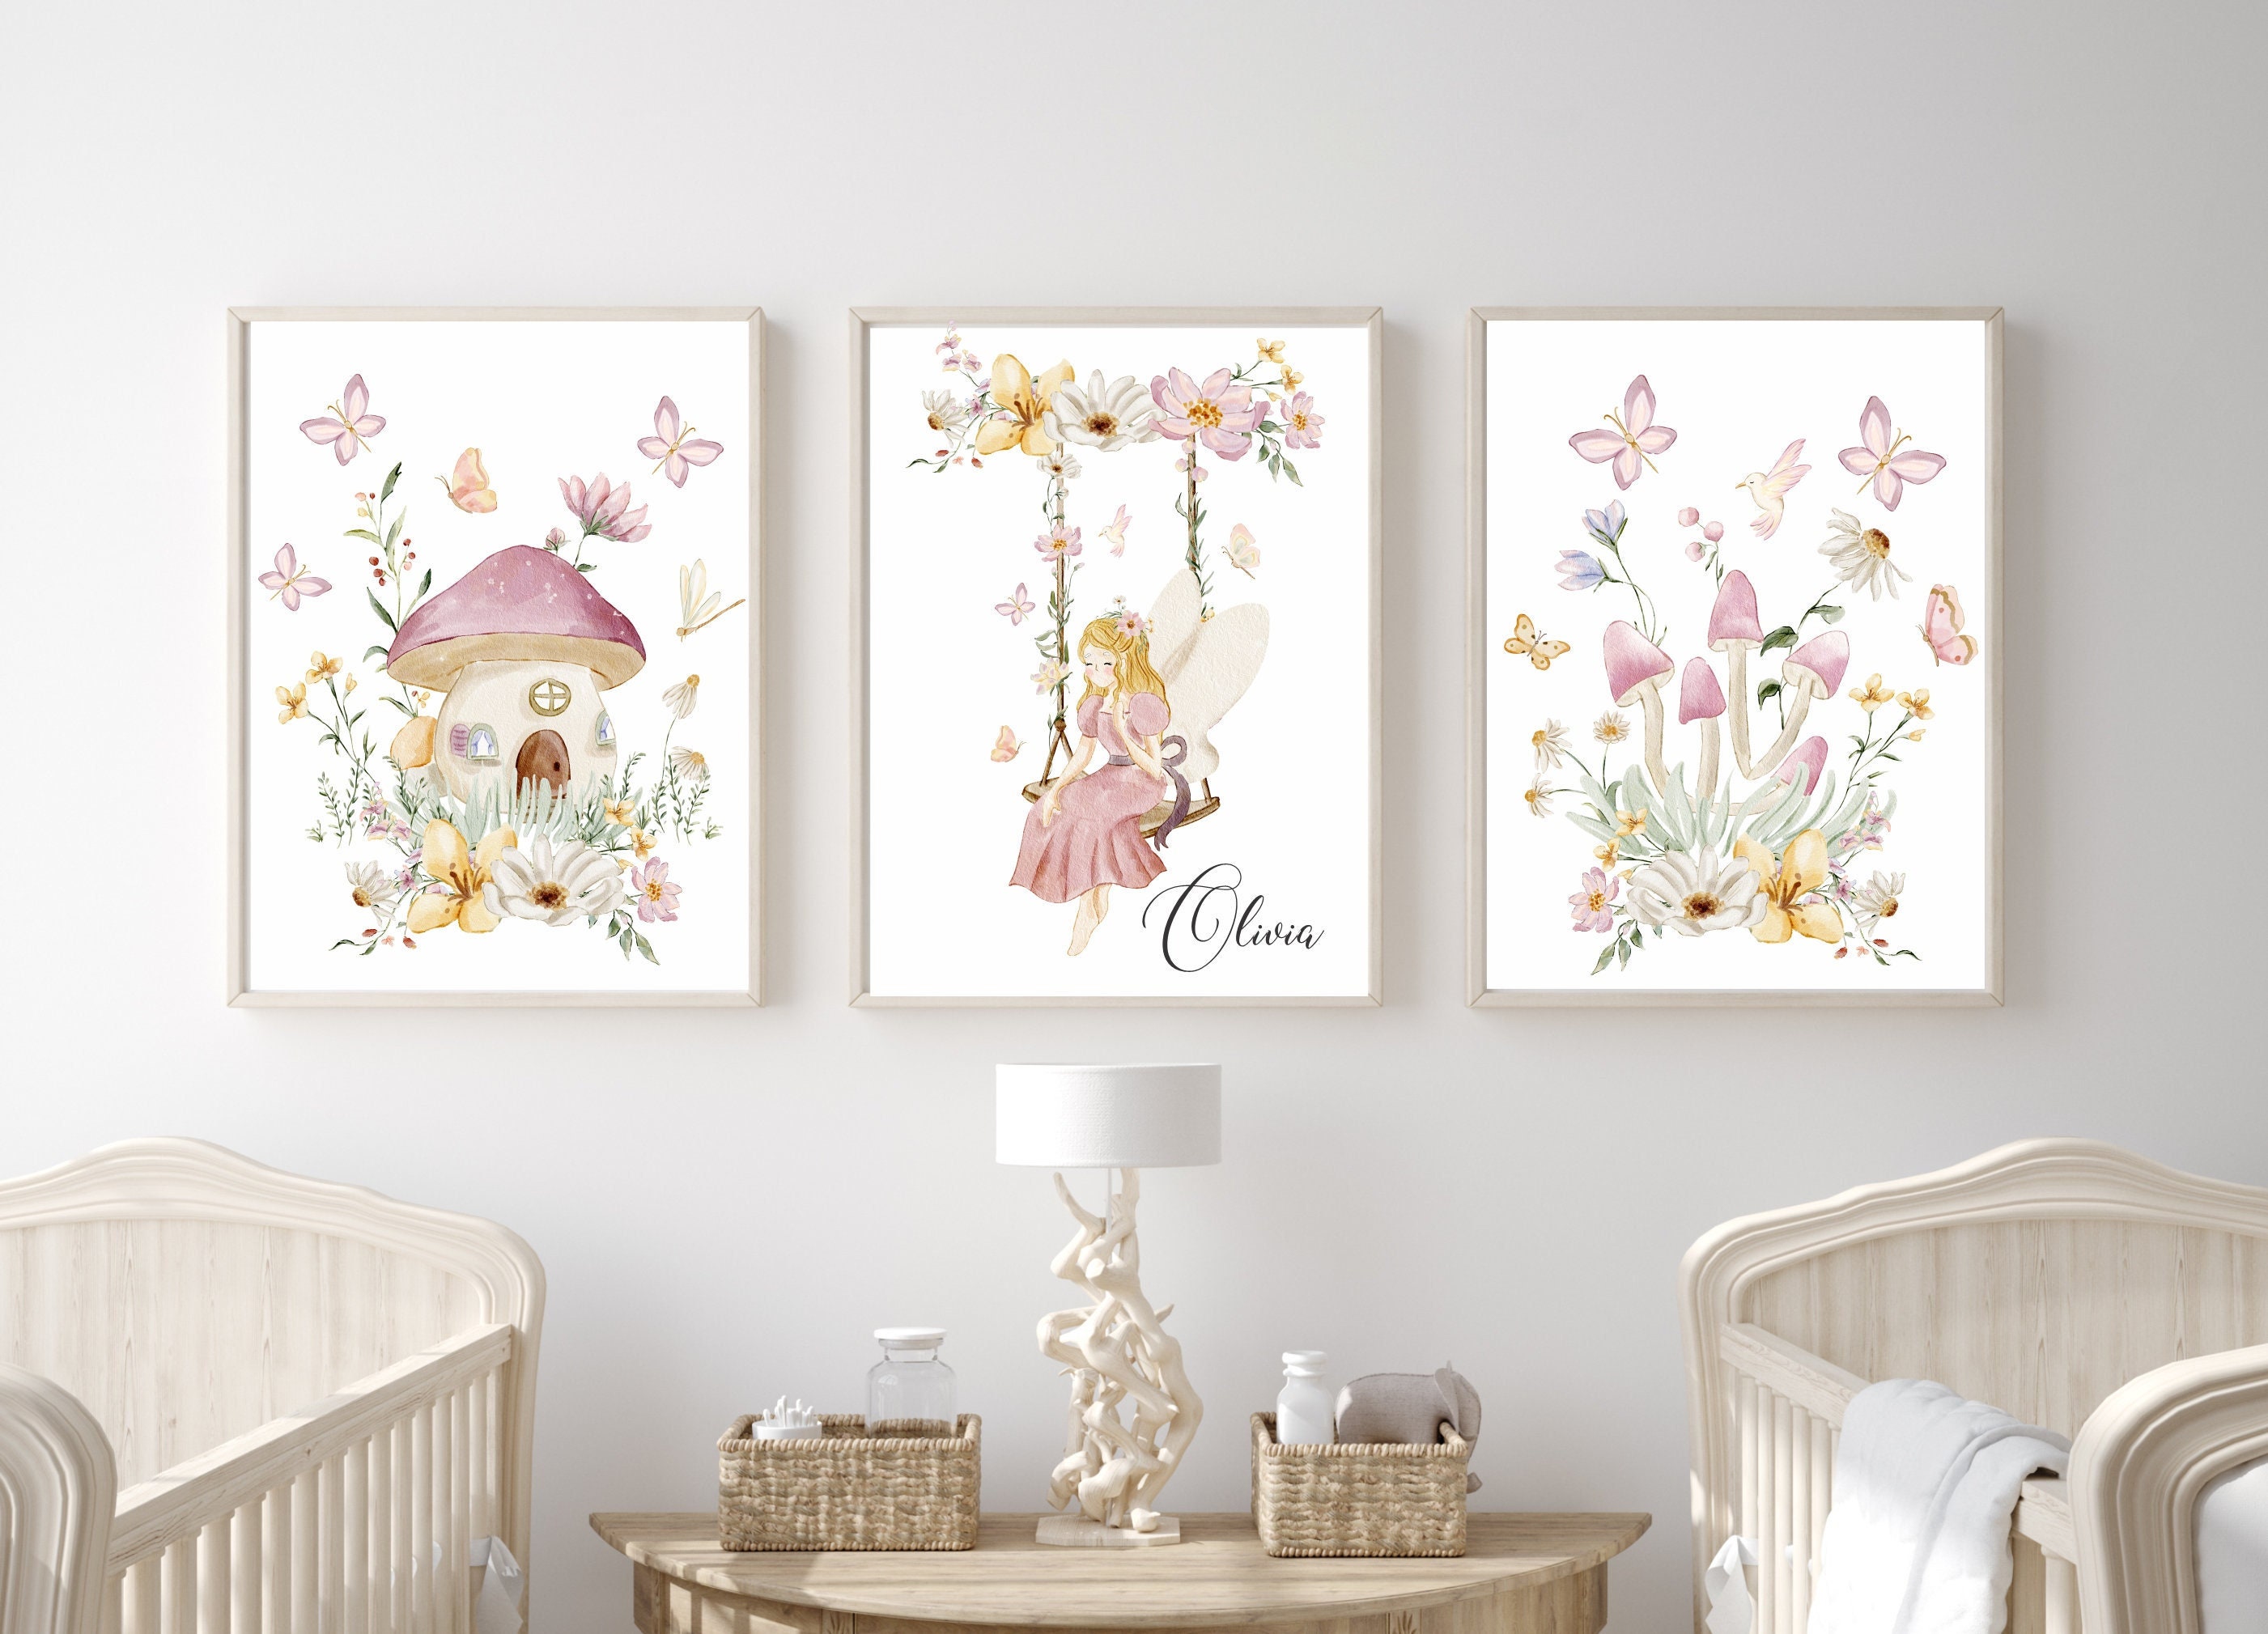  Fairy Wall Art for Girls Room, Fairy Pictures Wall Decor, Fairy  Nursery Wall Decor, Fairy Princess Wall Decor Little Girl, Flower Fairy for  Kids Bedroom : Handmade Products